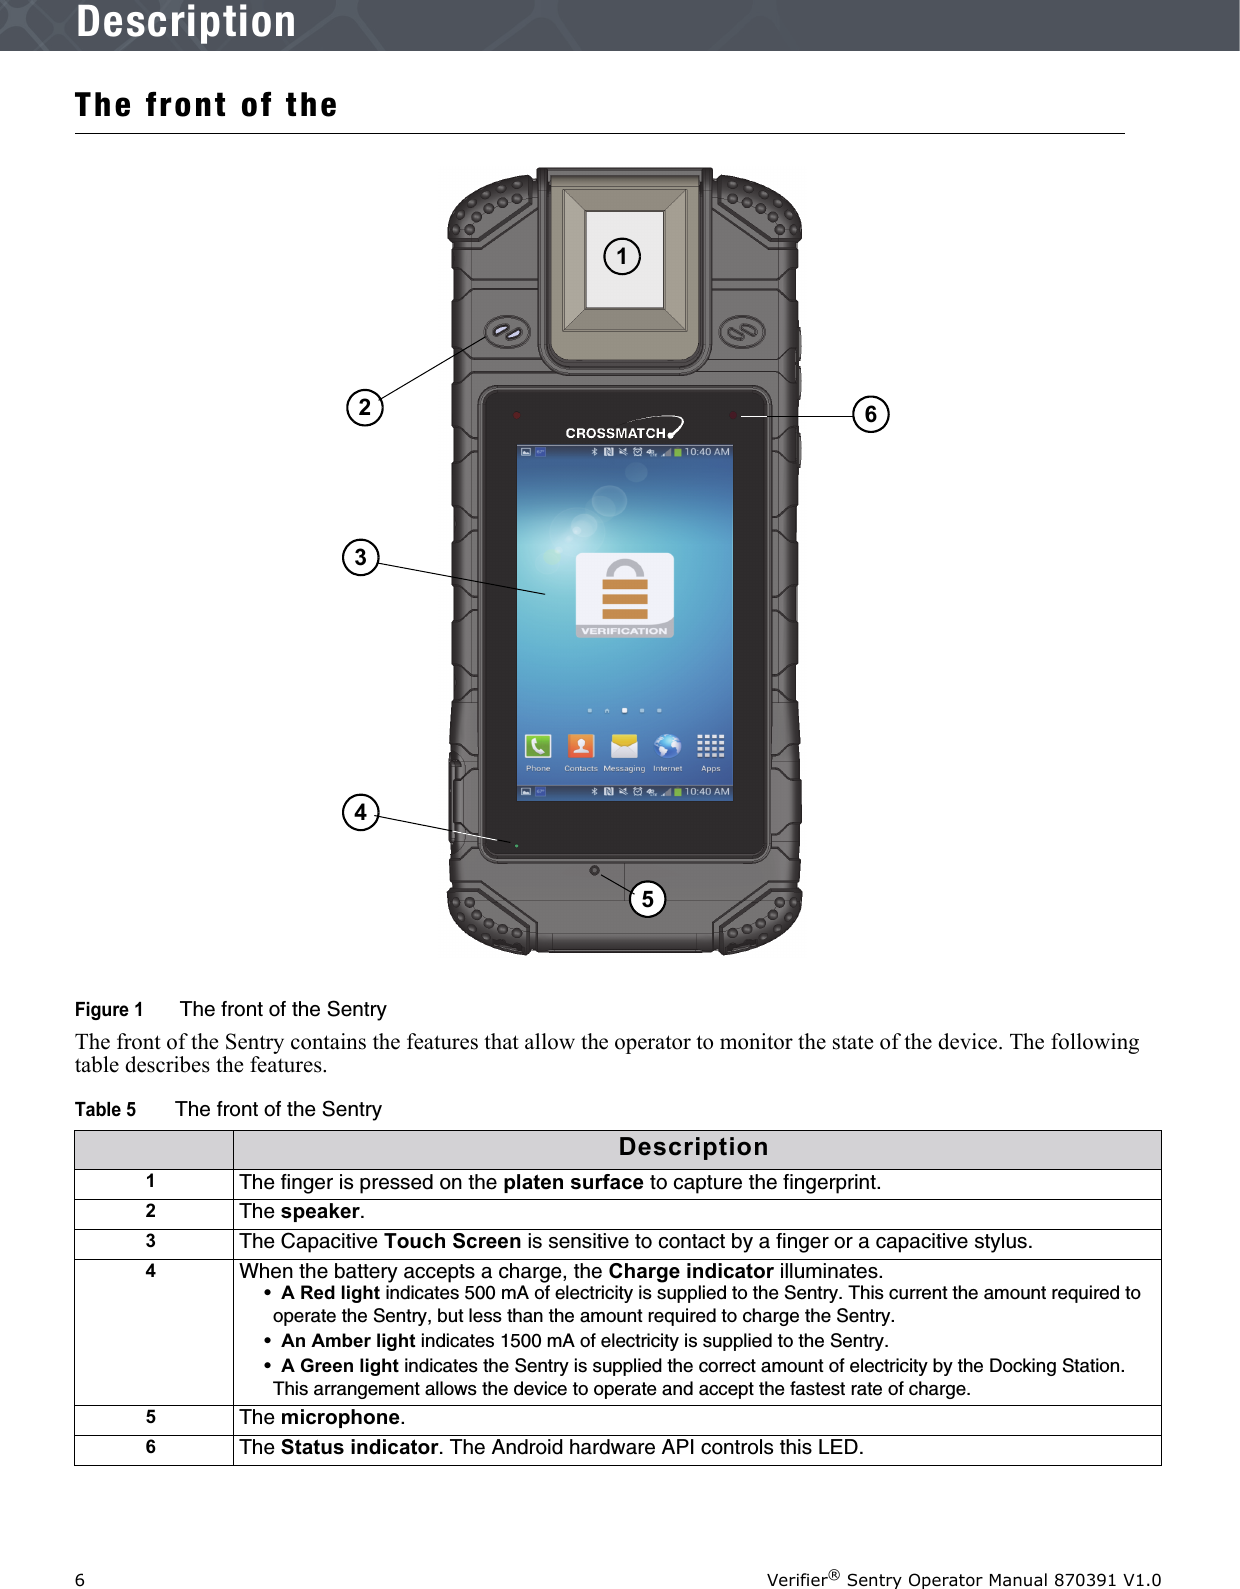 6Verifier® Sentry Operator Manual 870391 V1.0IntroductionDescriptionThe front of the Figure 1  The front of the SentryThe front of the Sentry contains the features that allow the operator to monitor the state of the device. The following table describes the features.Table 5The front of the SentryDescription1The finger is pressed on the platen surface to capture the fingerprint.2The speaker.3The Capacitive Touch Screen is sensitive to contact by a finger or a capacitive stylus.4When the battery accepts a charge, the Charge indicator illuminates. •  A Red light indicates 500 mA of electricity is supplied to the Sentry. This current the amount required to operate the Sentry, but less than the amount required to charge the Sentry.•  An Amber light indicates 1500 mA of electricity is supplied to the Sentry. •  A Green light indicates the Sentry is supplied the correct amount of electricity by the Docking Station. This arrangement allows the device to operate and accept the fastest rate of charge.5The microphone.6The Status indicator. The Android hardware API controls this LED.152346